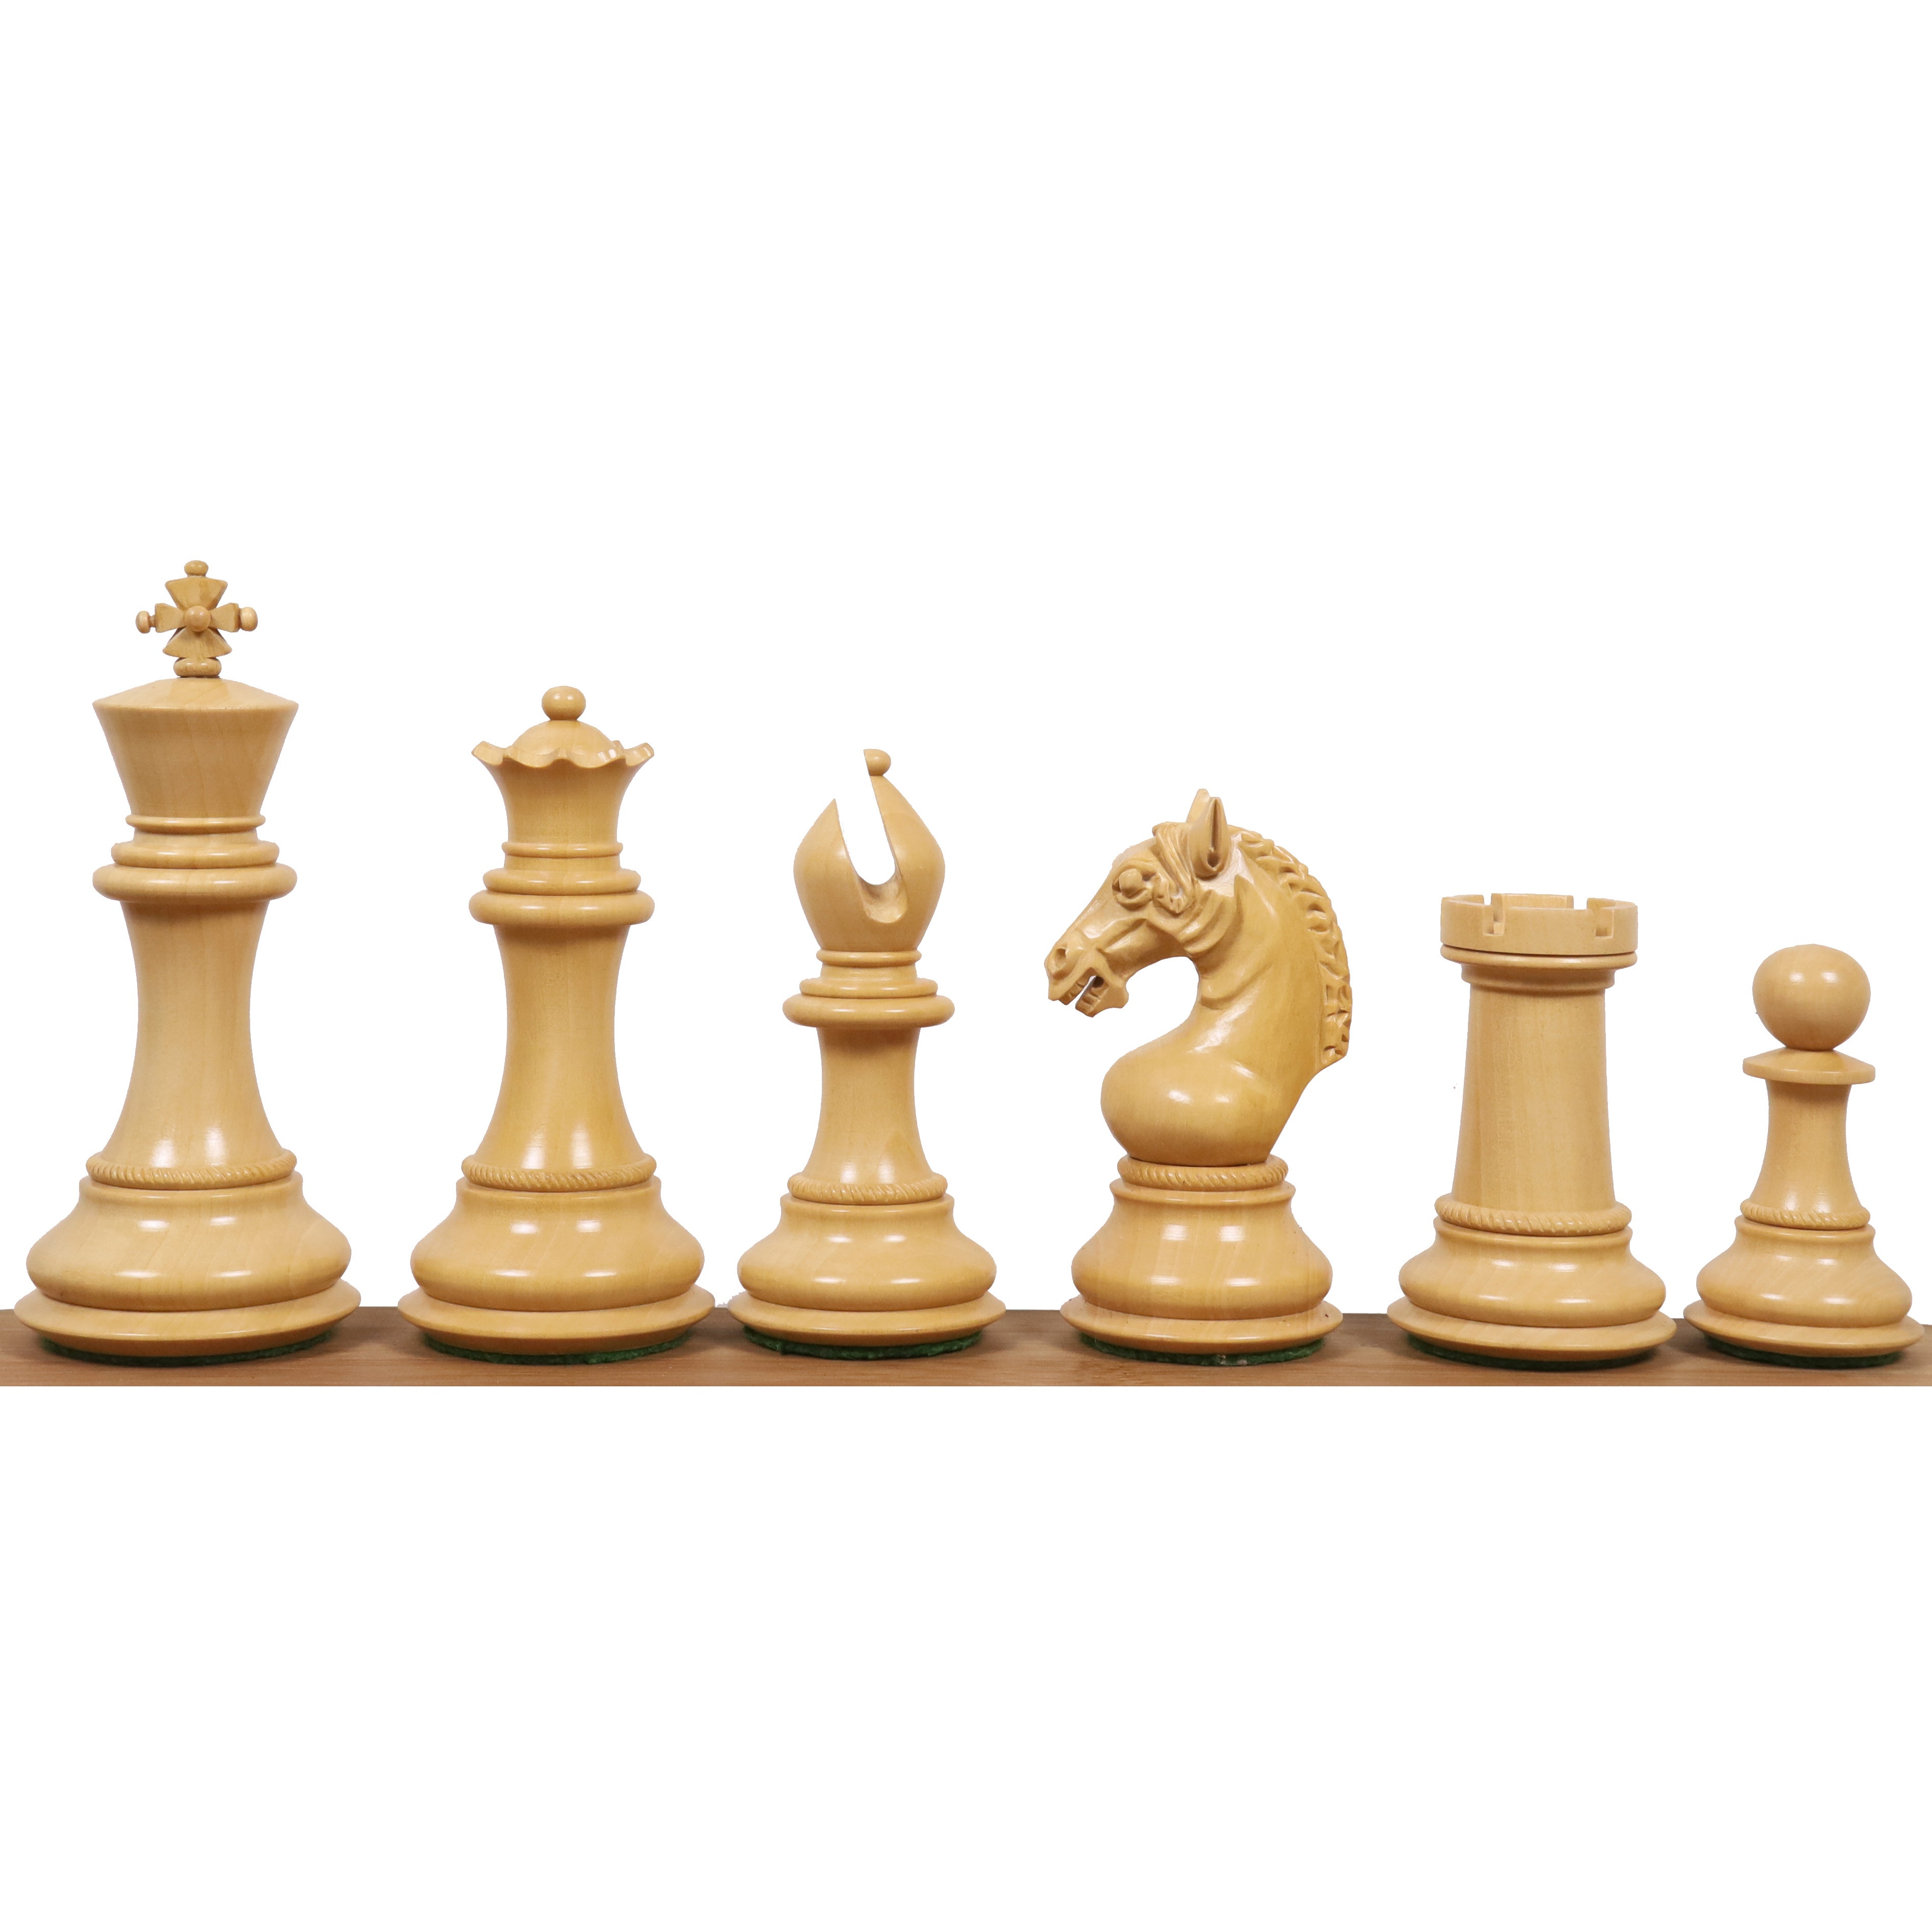 Combo of 4.5" Sheffield Staunton Luxury Chess Ebony Wood Pieces with Board and Storage Box